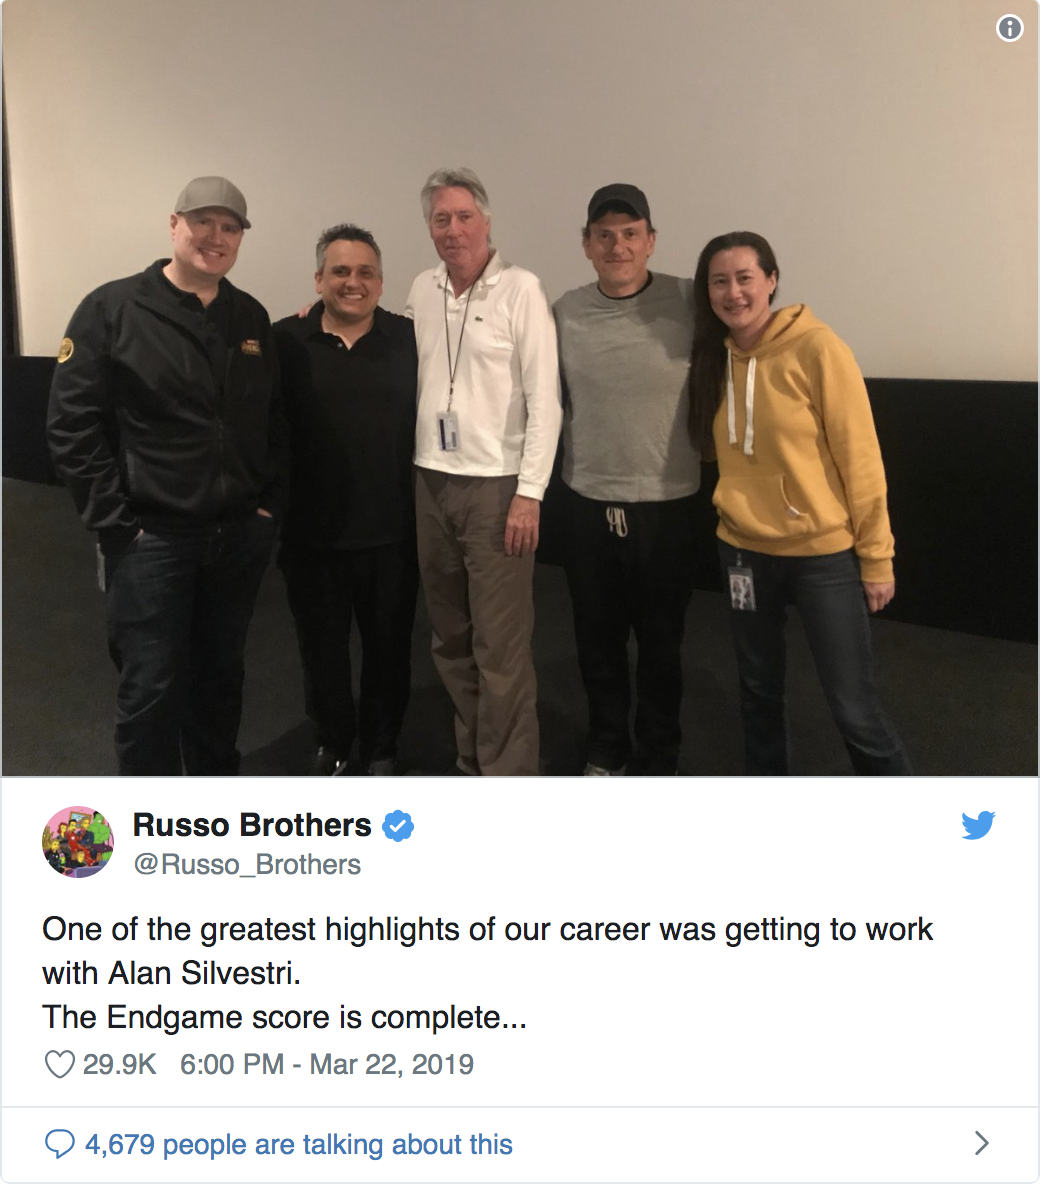 Russo brothers confirm Alan Silvestri has completed the Avengers: Endgame score